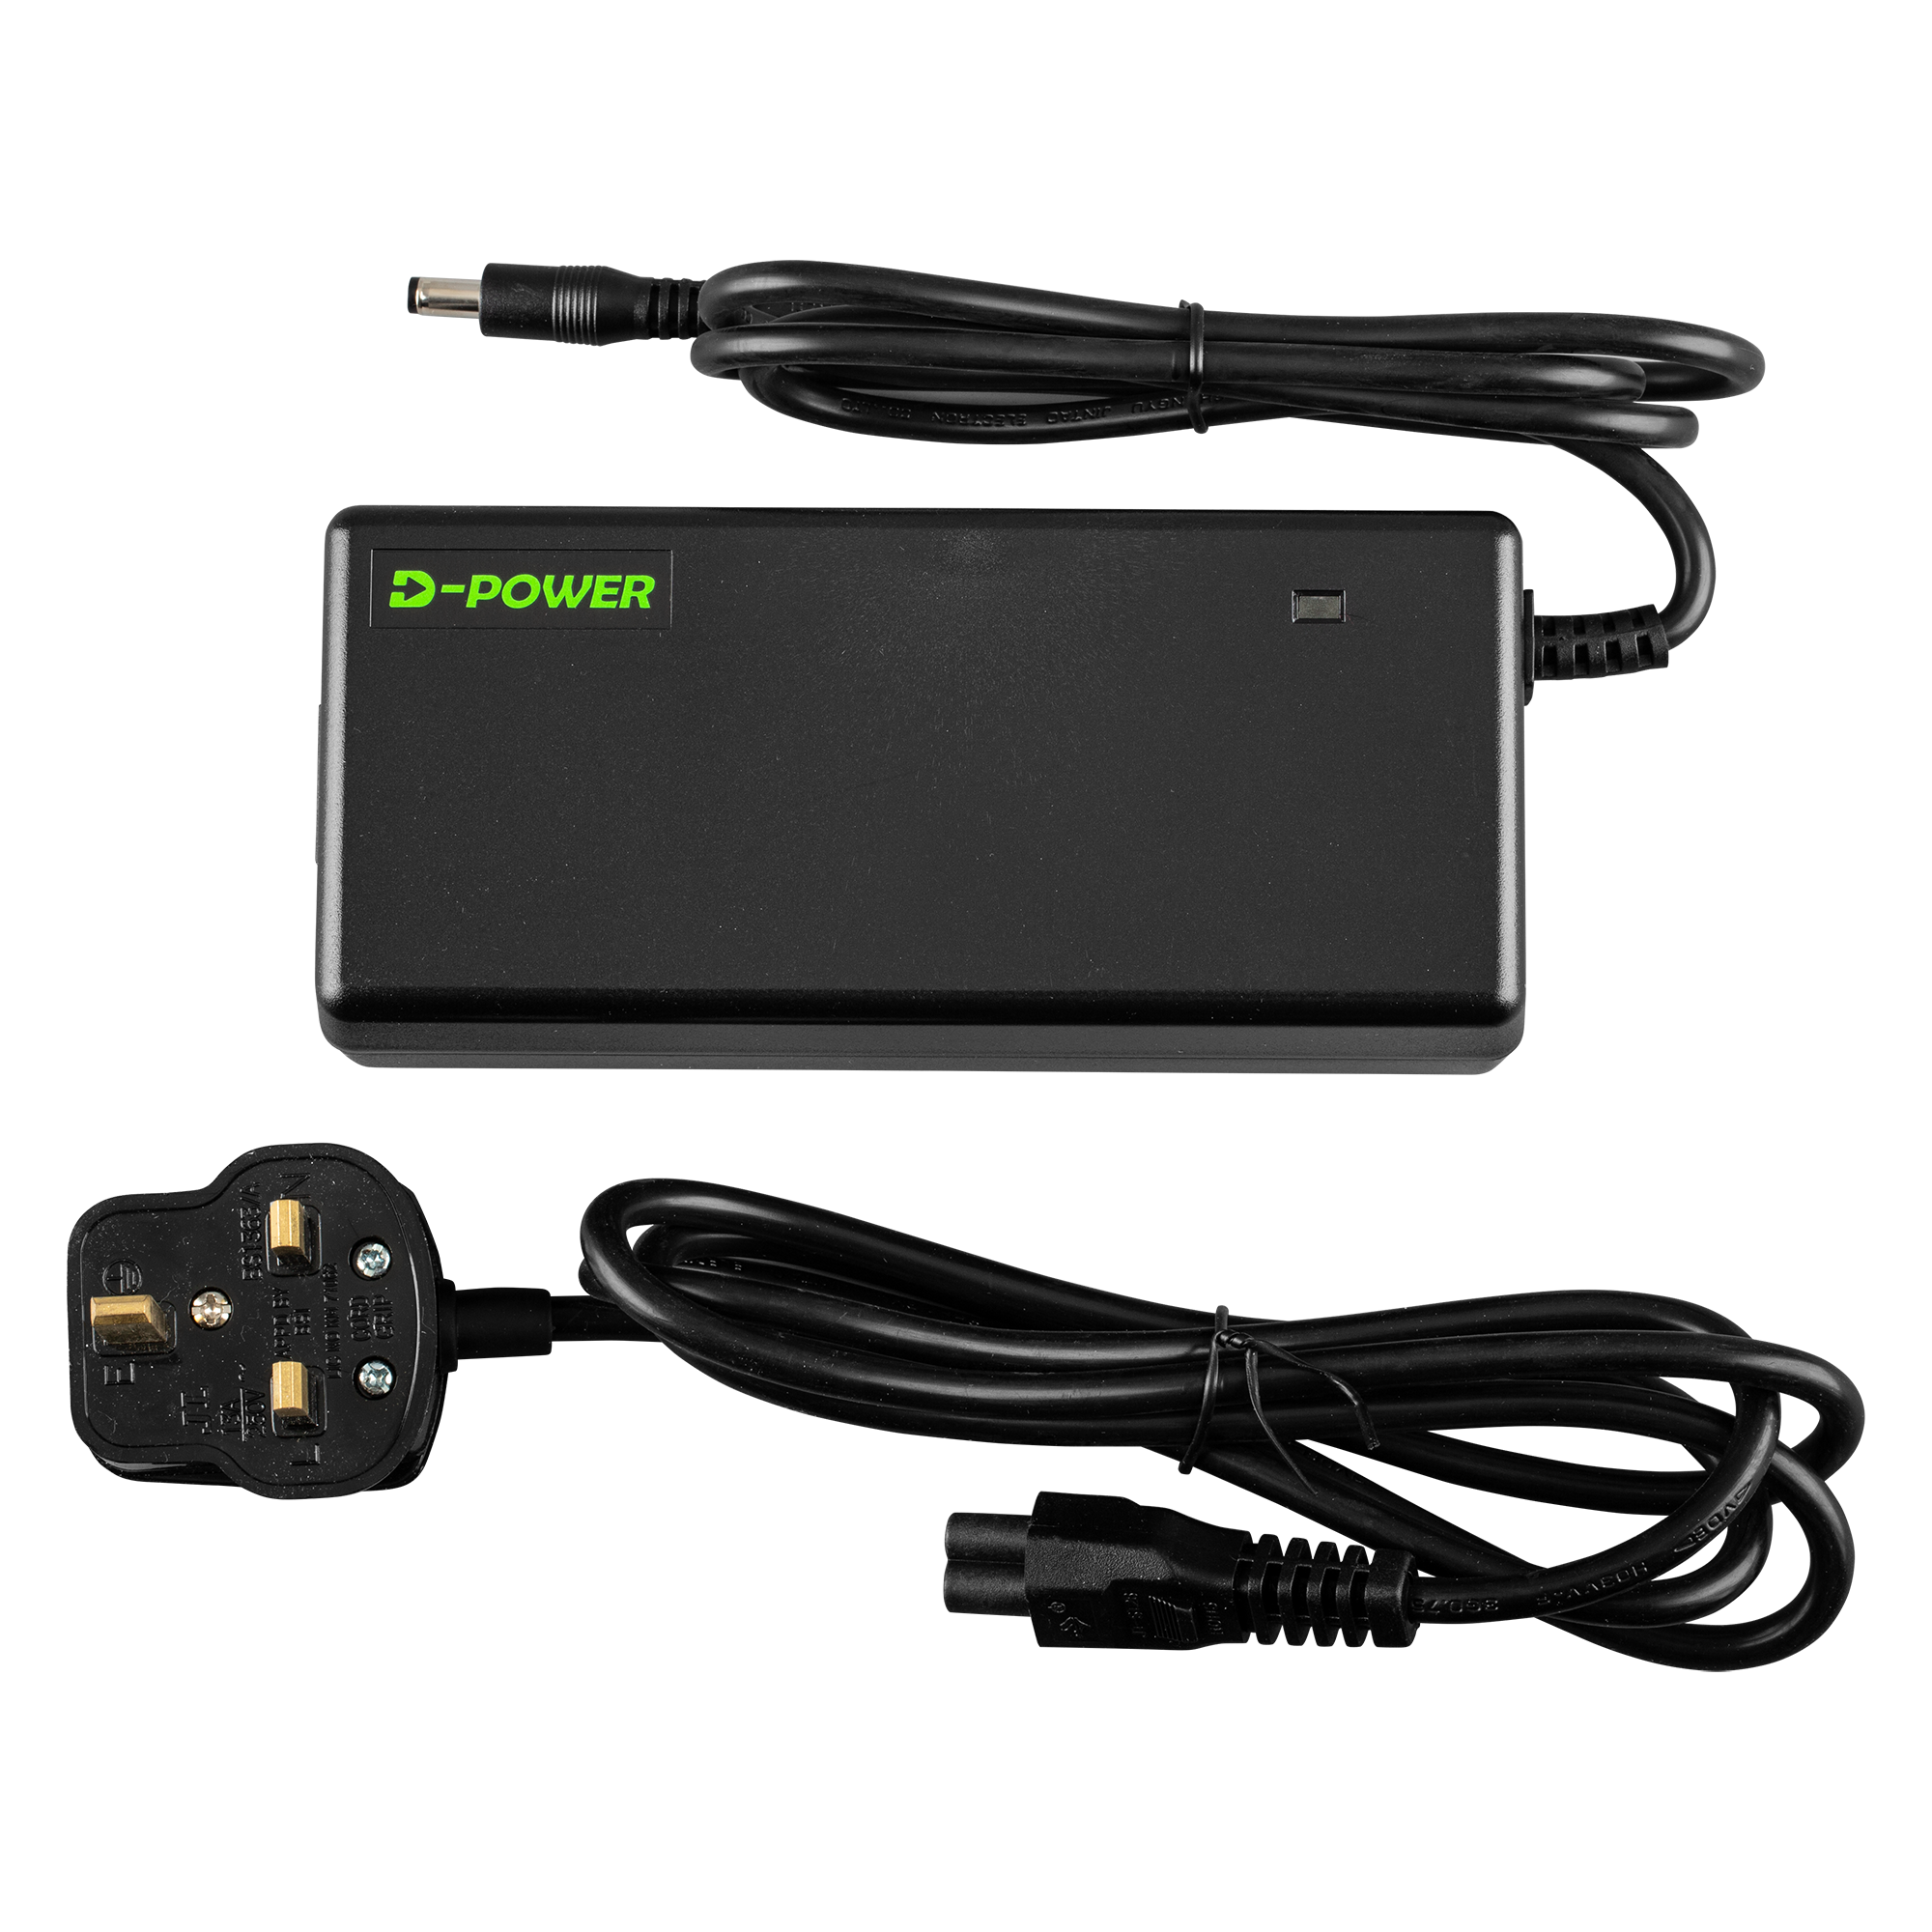 Pedibal Lithium-Ion Battery Charger Cable & AC adaptor Navigata CitE